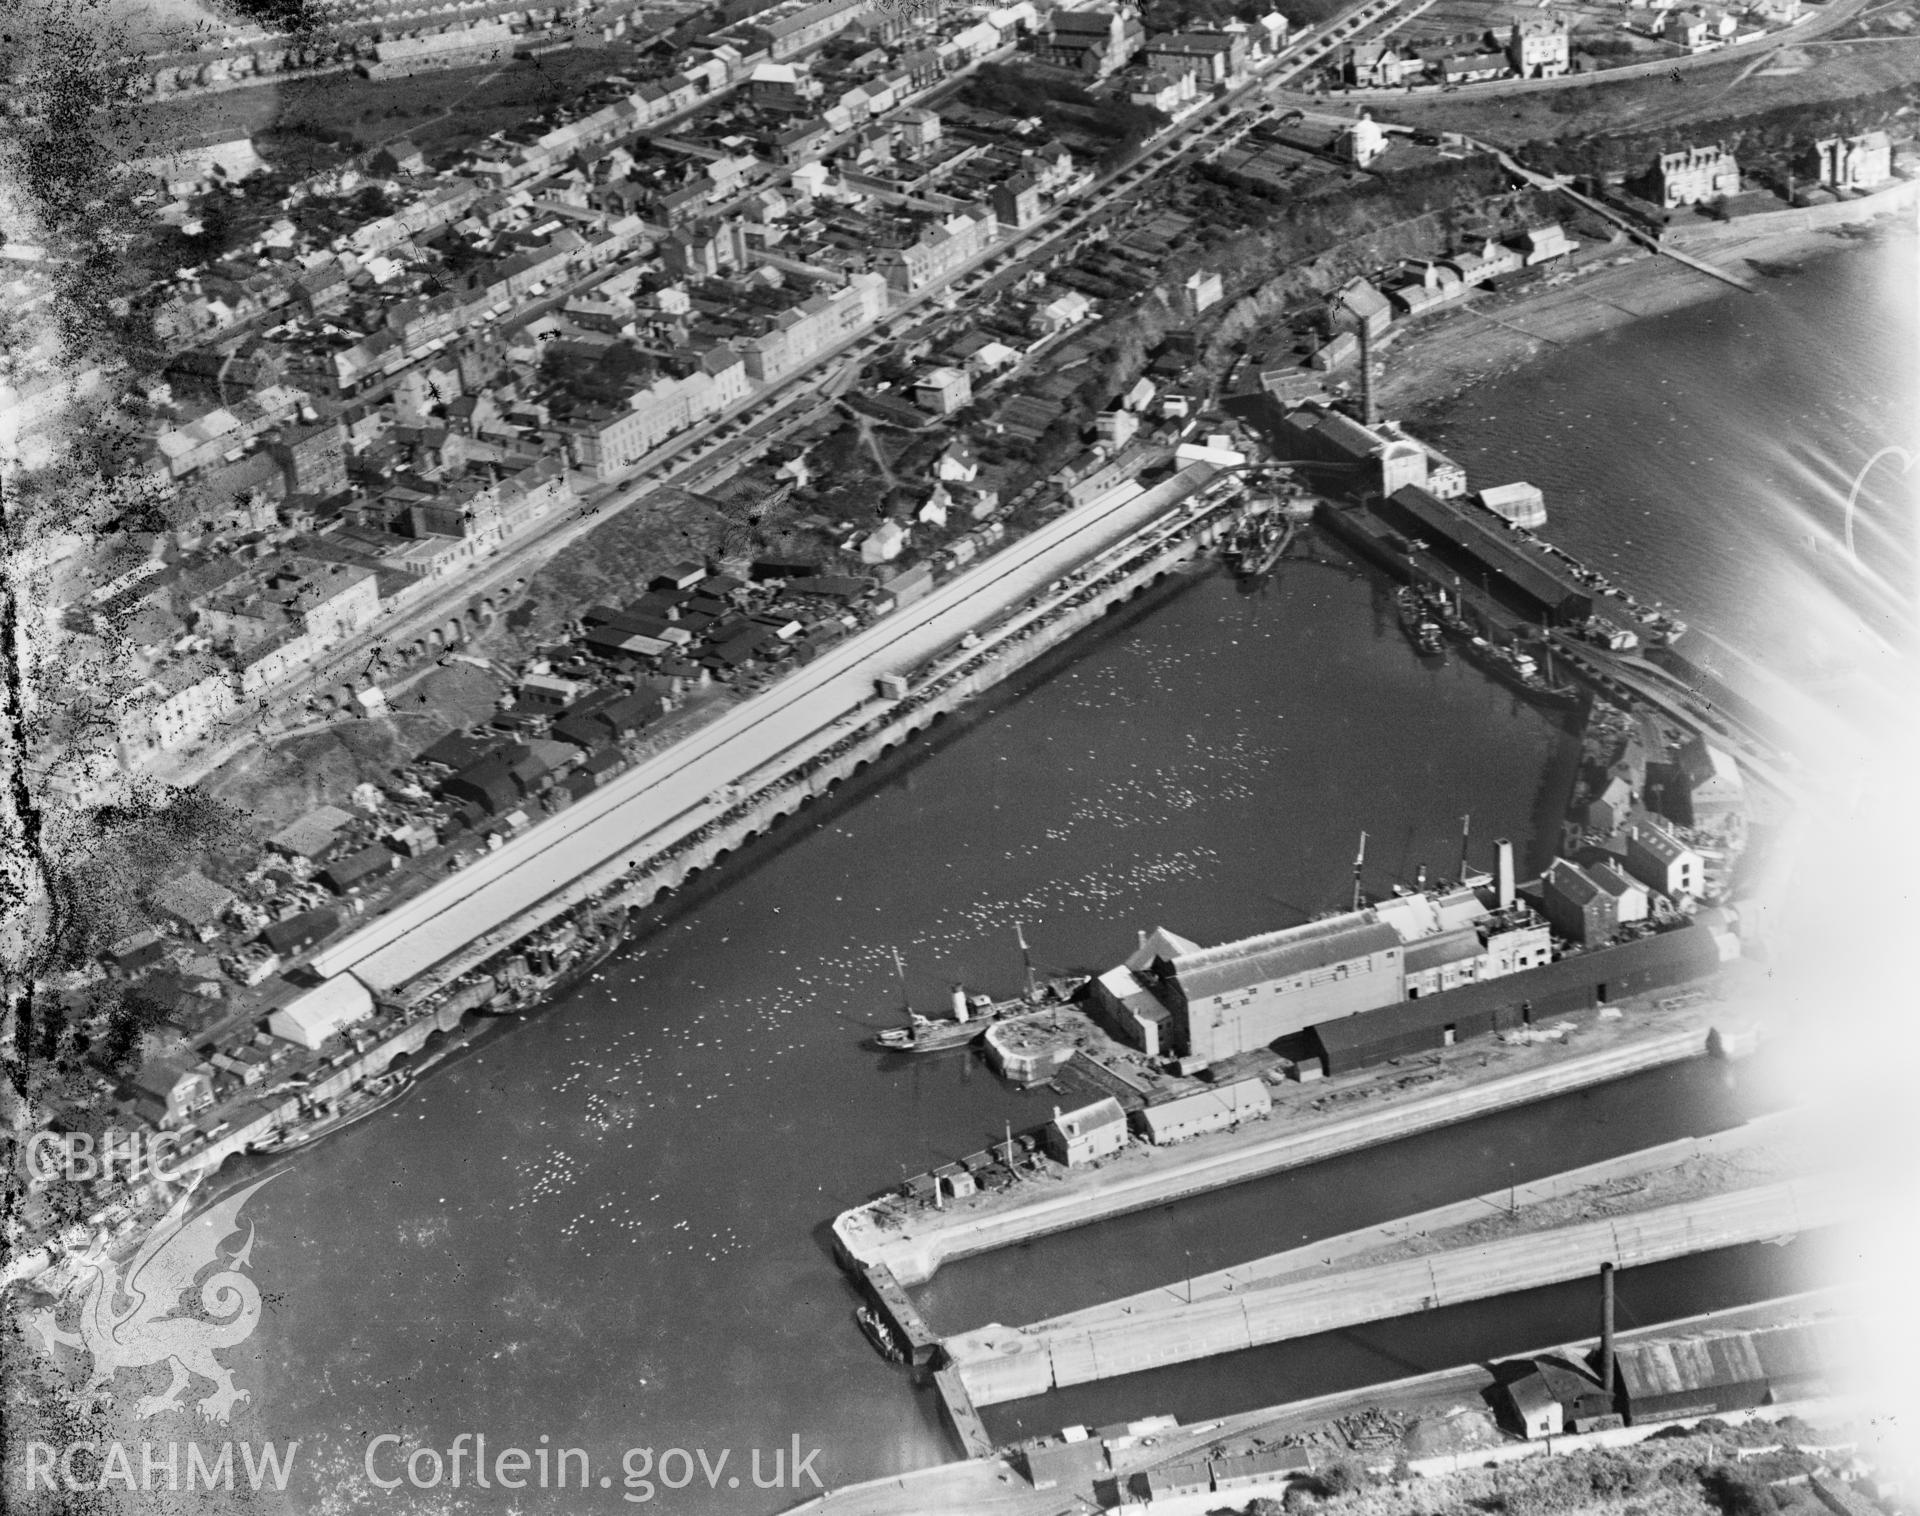 View of Milford Haven and docks, oblique aerial view. 5?x4? black and white glass plate negative.